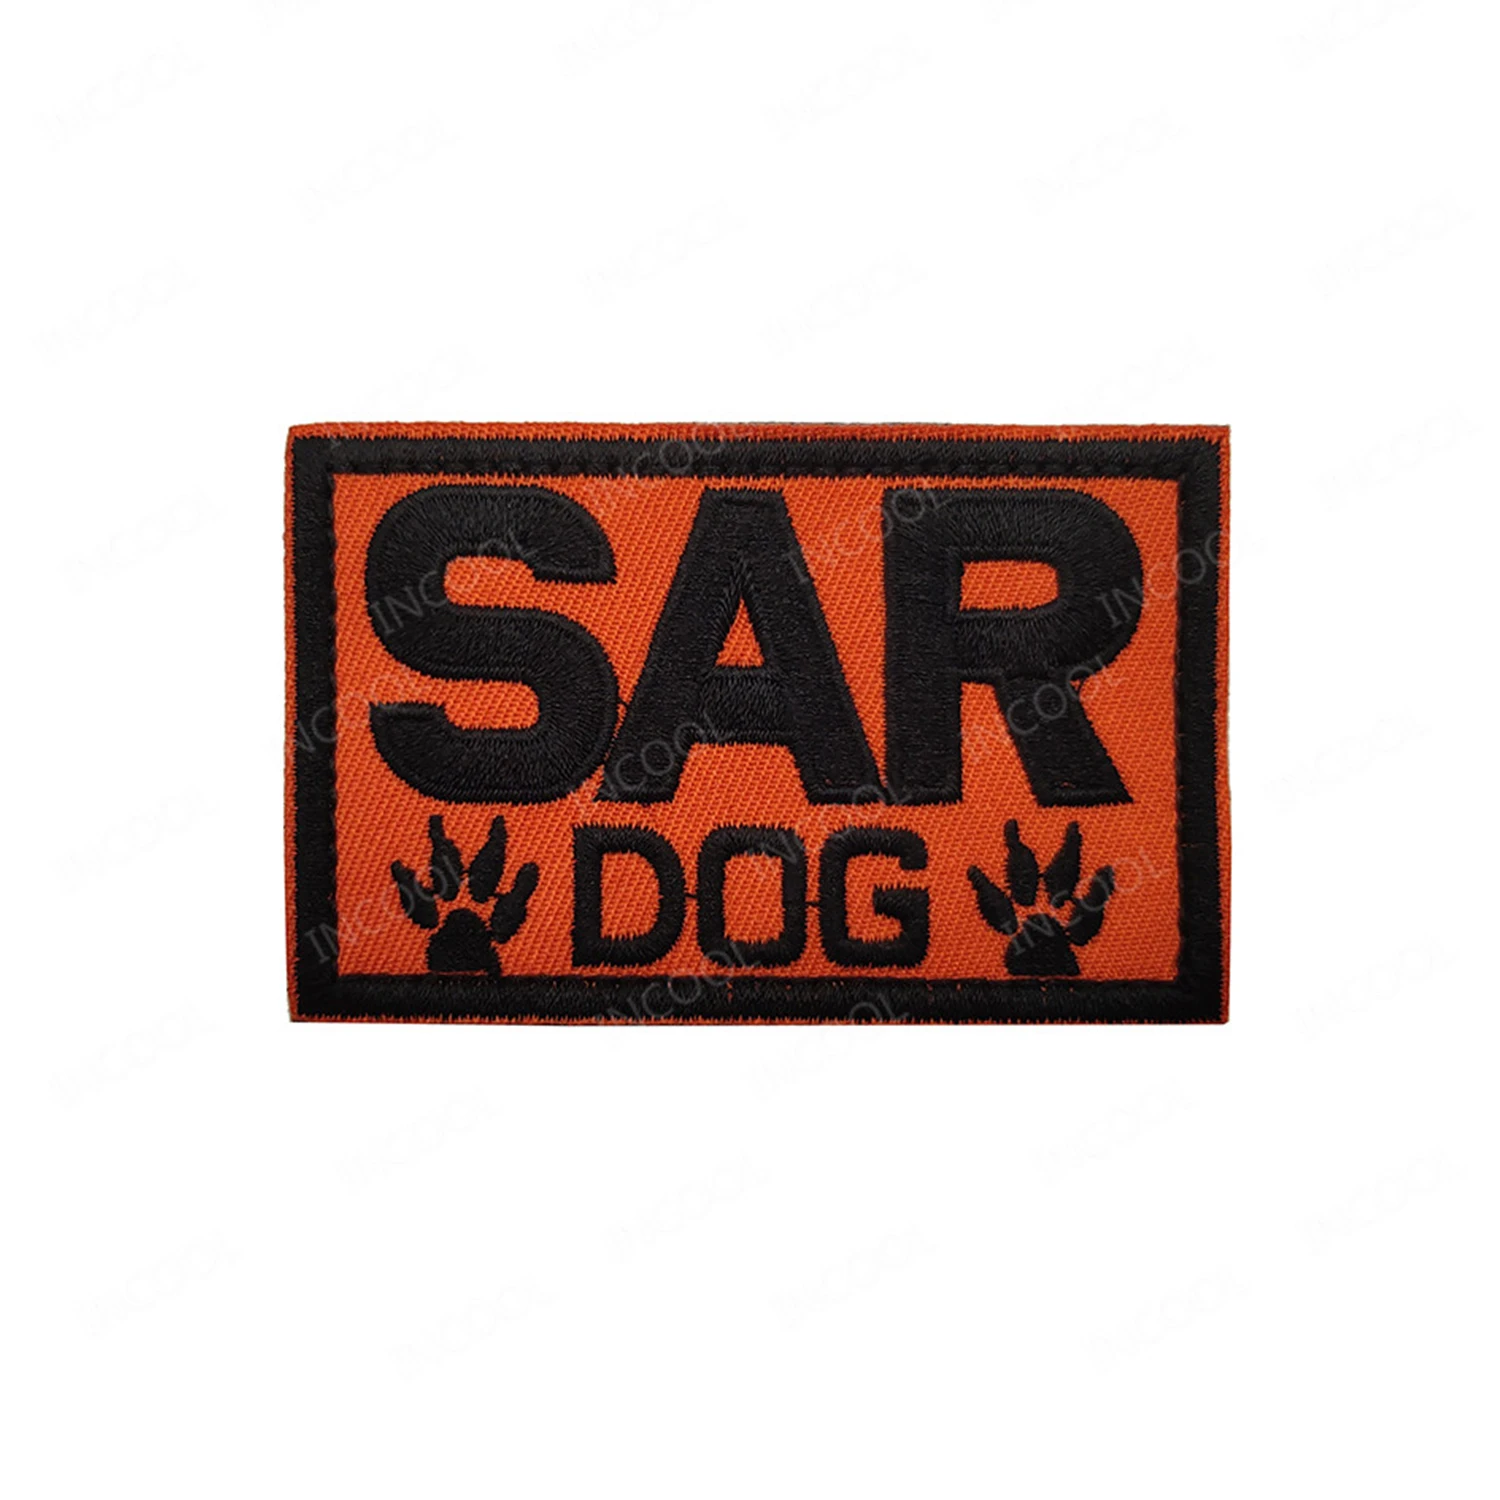 Service Dog SAR Dog Search and Rescue K9 Patches Tactical Military Patch Armband Embroidered Badges For Clothing Cap Jacket Bags